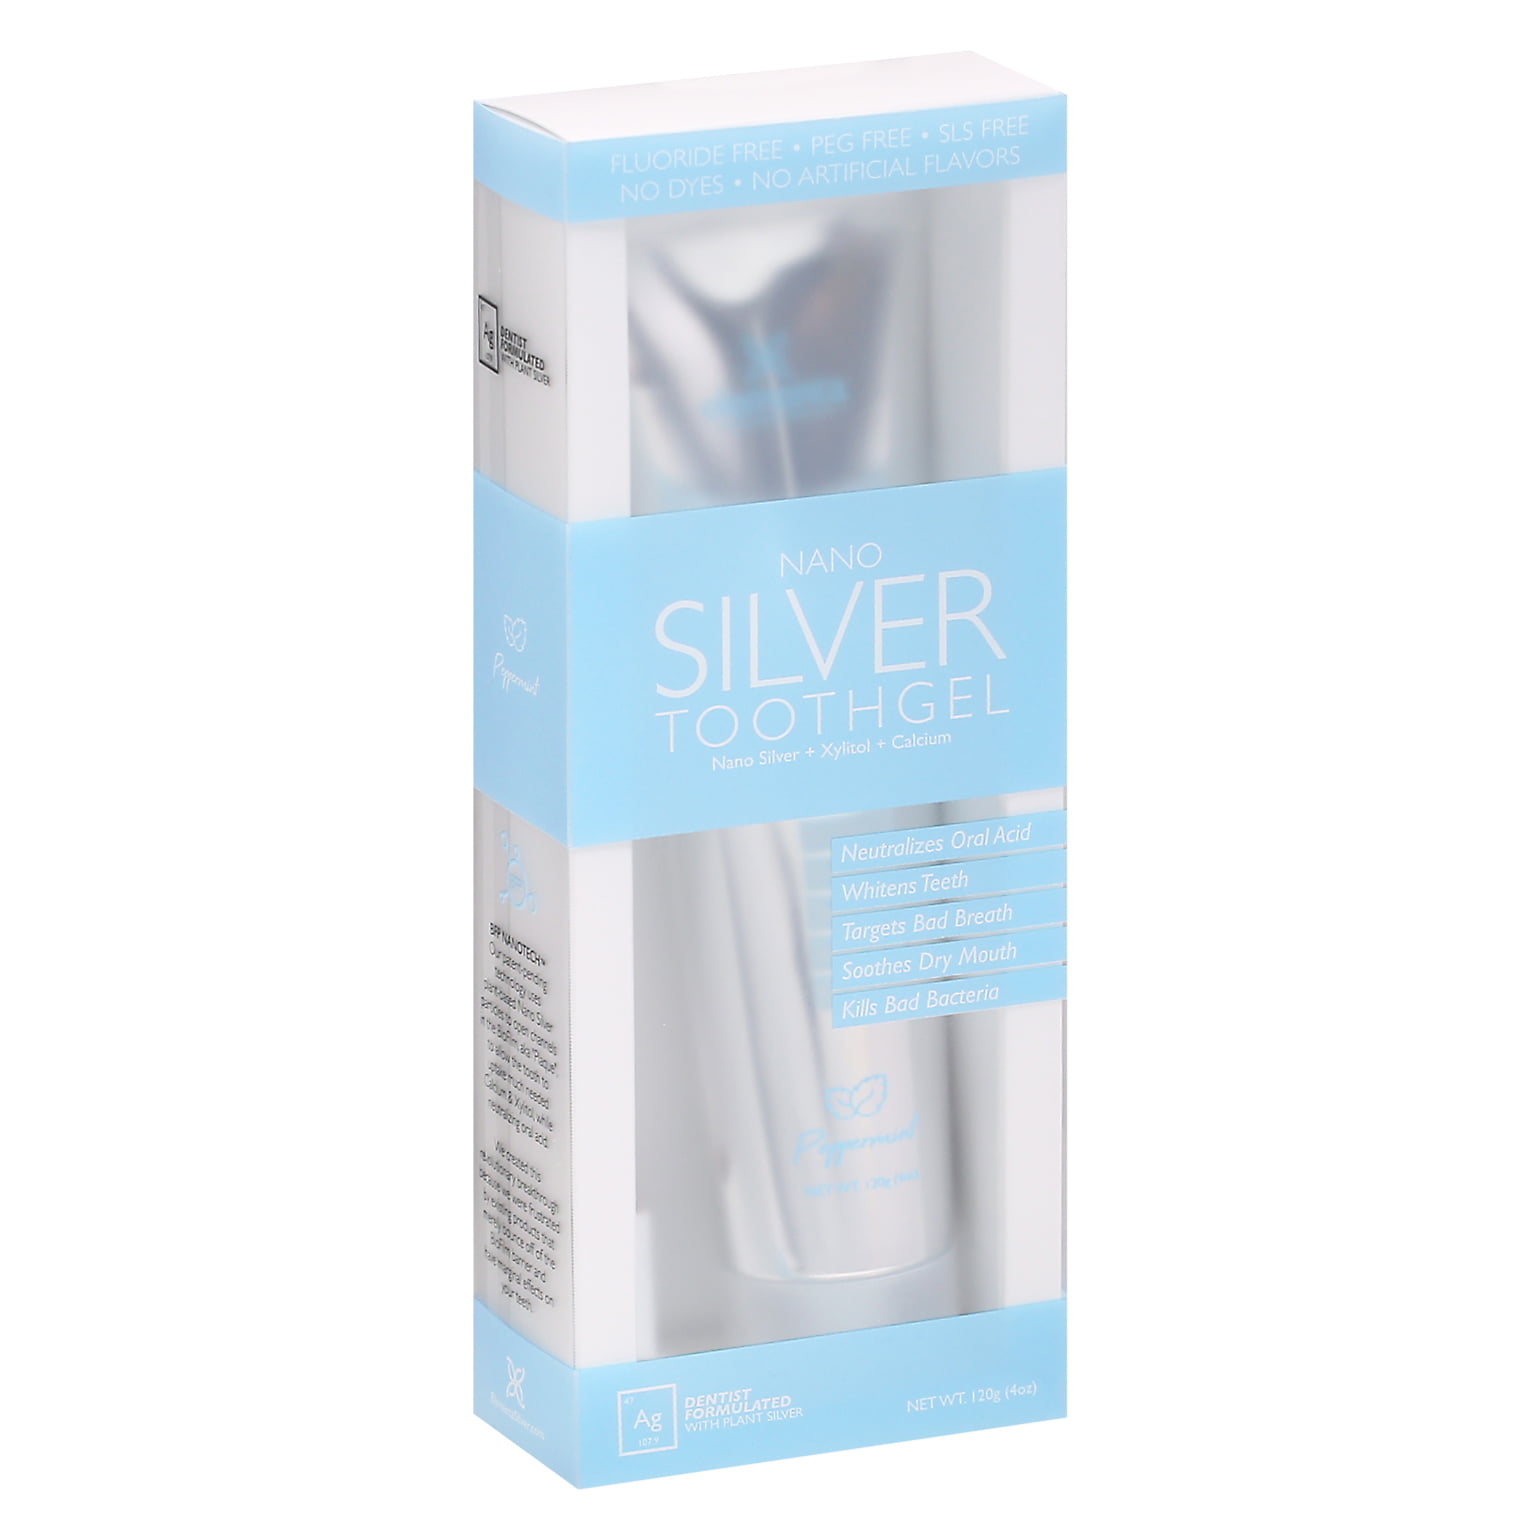 Elementa Silver - Nano Silver Products for Dental Professionals